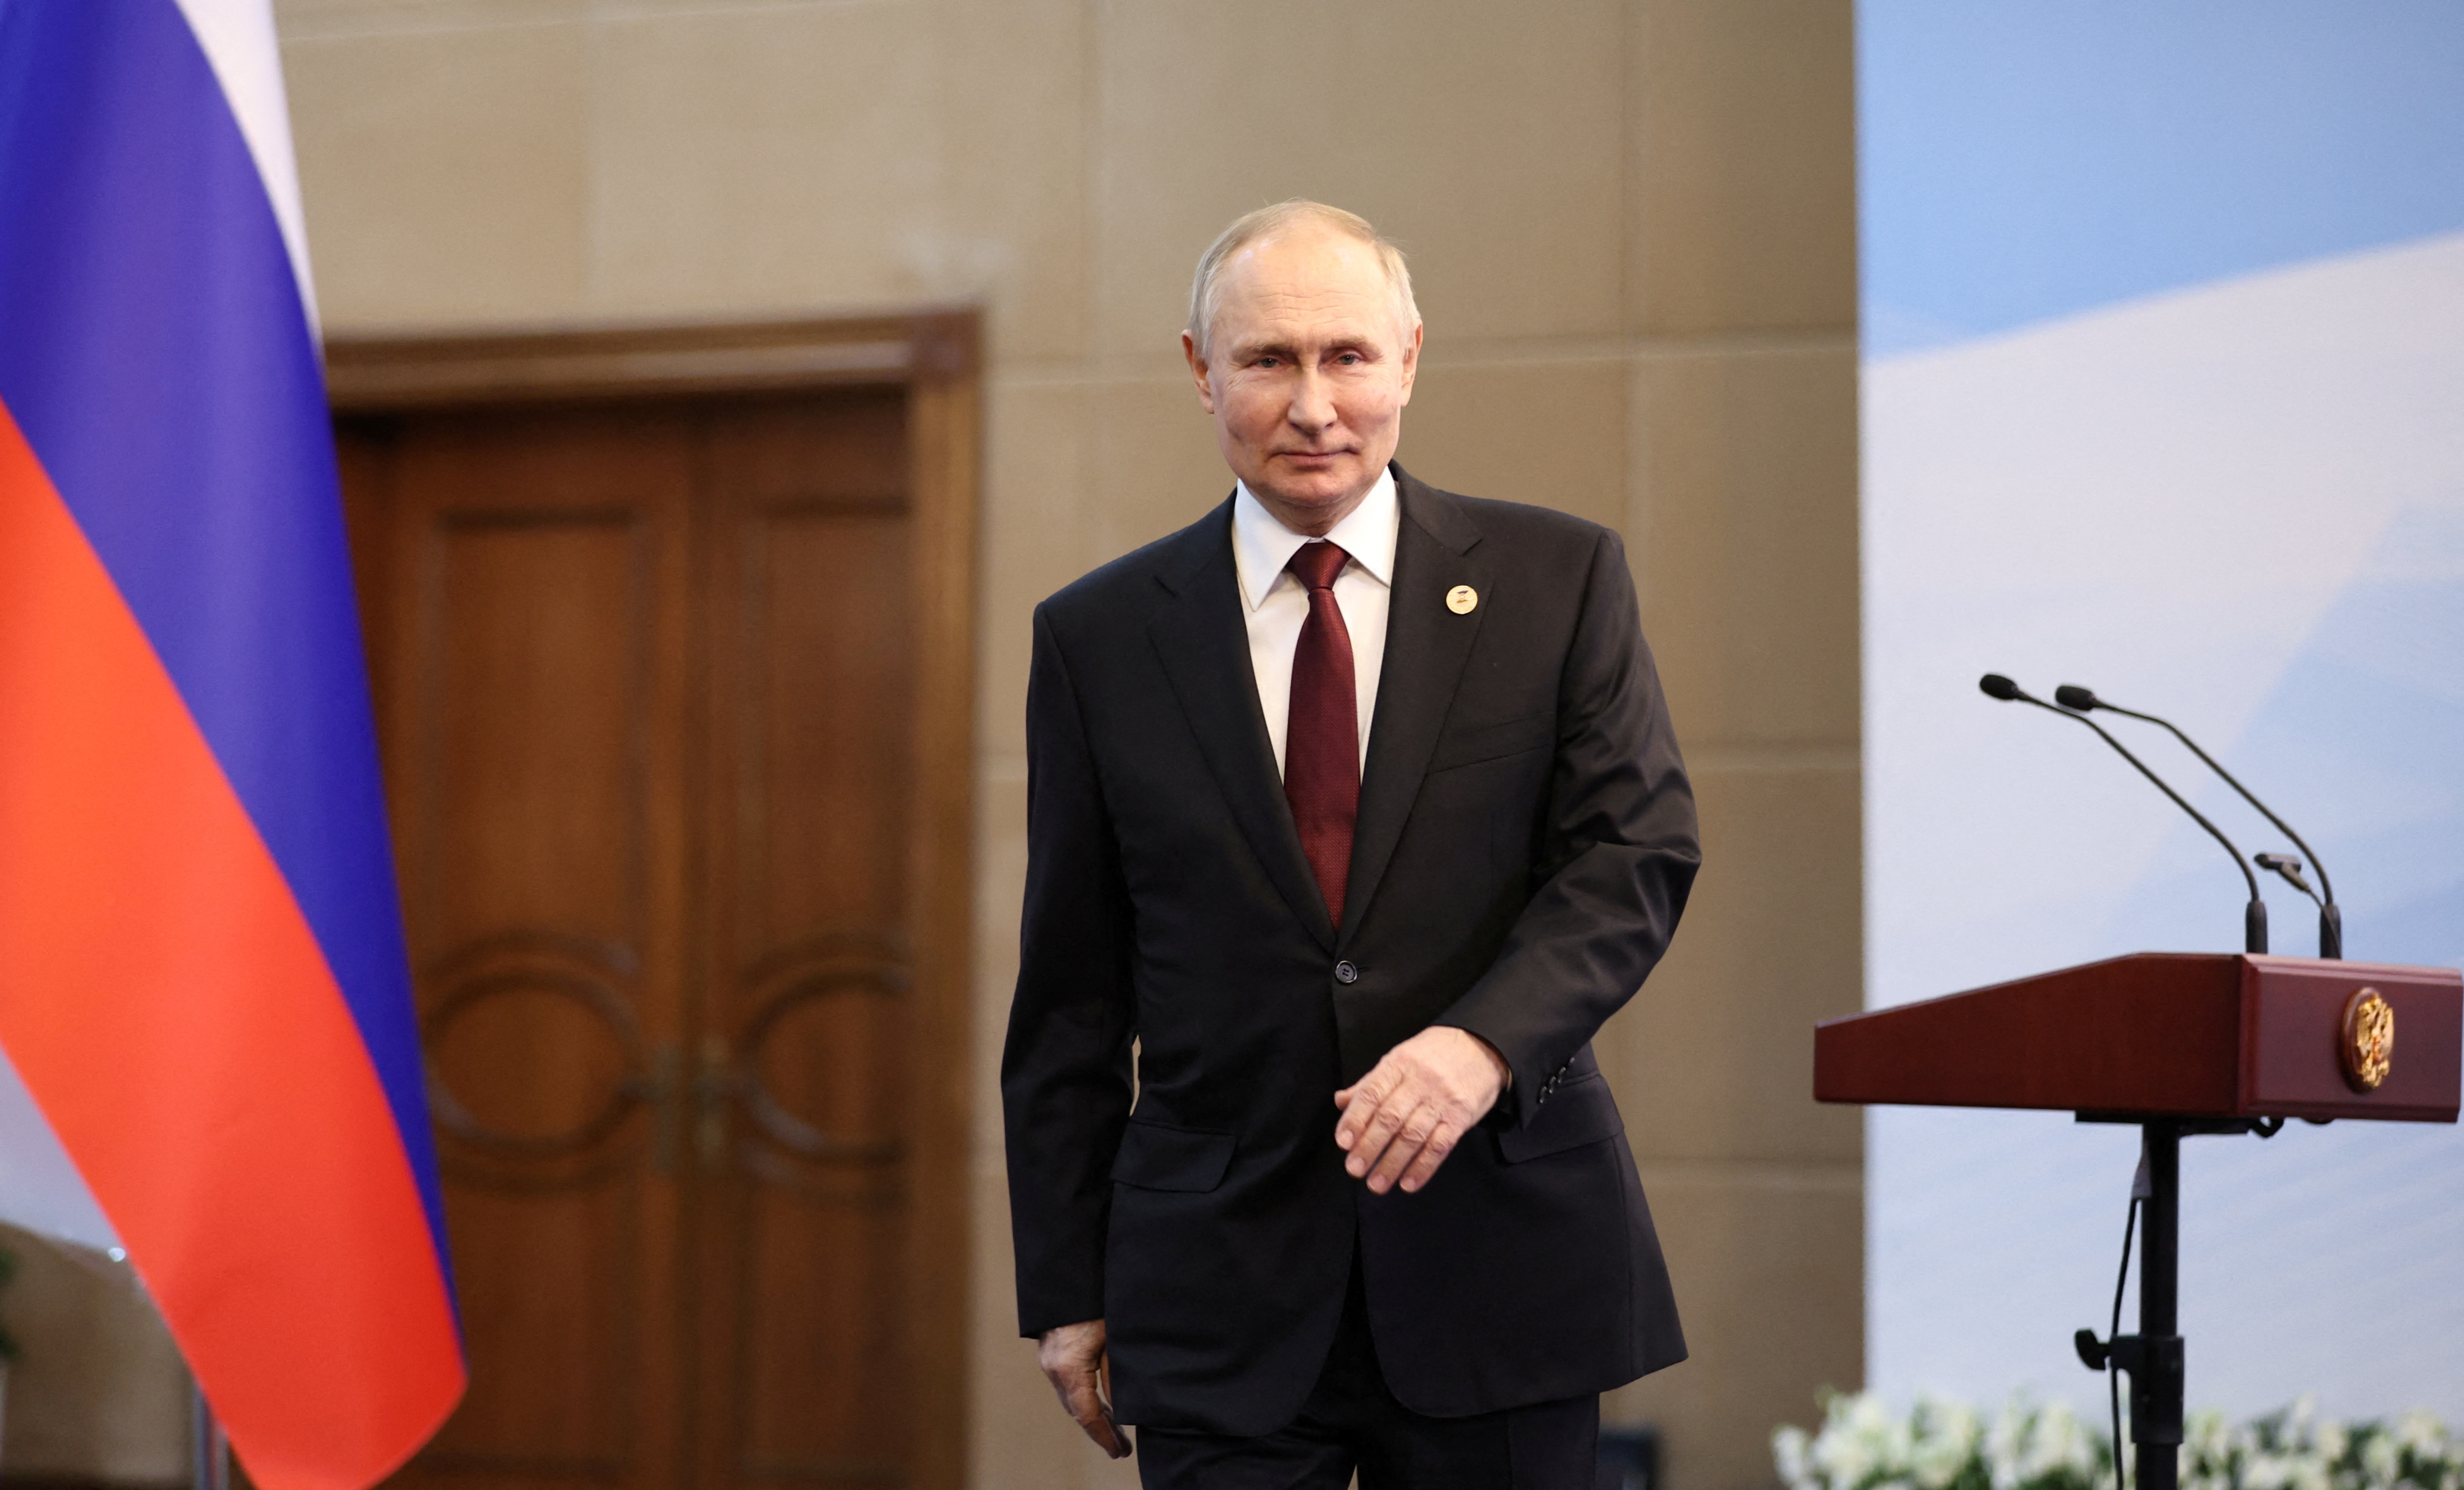 Russian President Putin attends a news conference in Bishkek